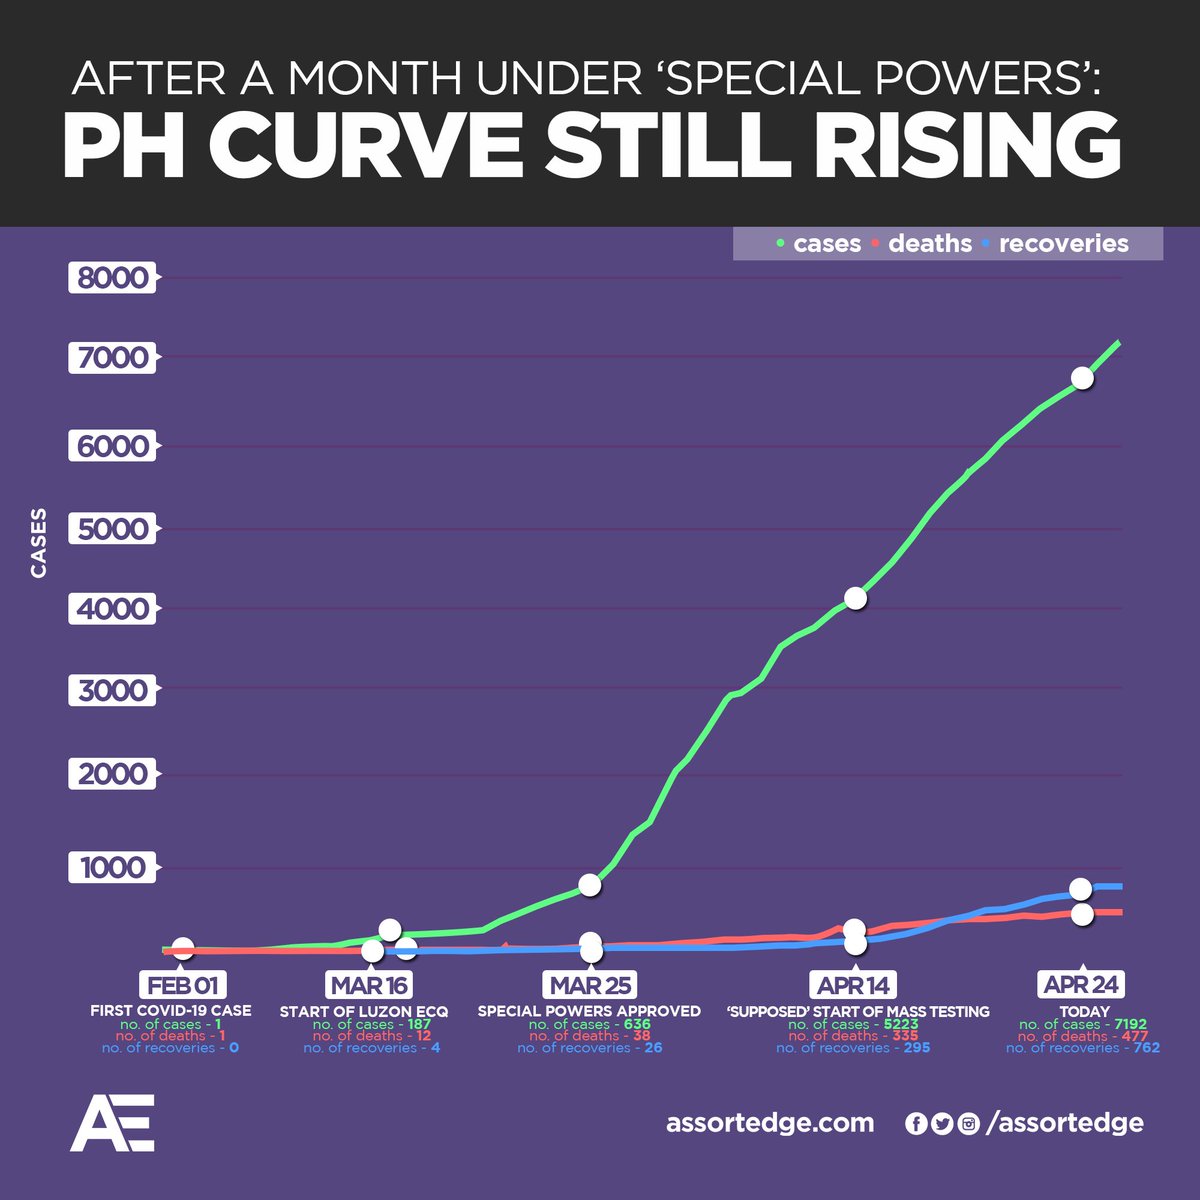 LOOK: PH FAR FROM FLATTENING ‘CURVE’ AFTER A MONTH OF SPECIAL POWERSWith the lack of mass testing and other proactive measures, public health experts fear that the statistics does not actually provide a real picture of the spread—thus making a ‘flattening’ claim inaccurate.